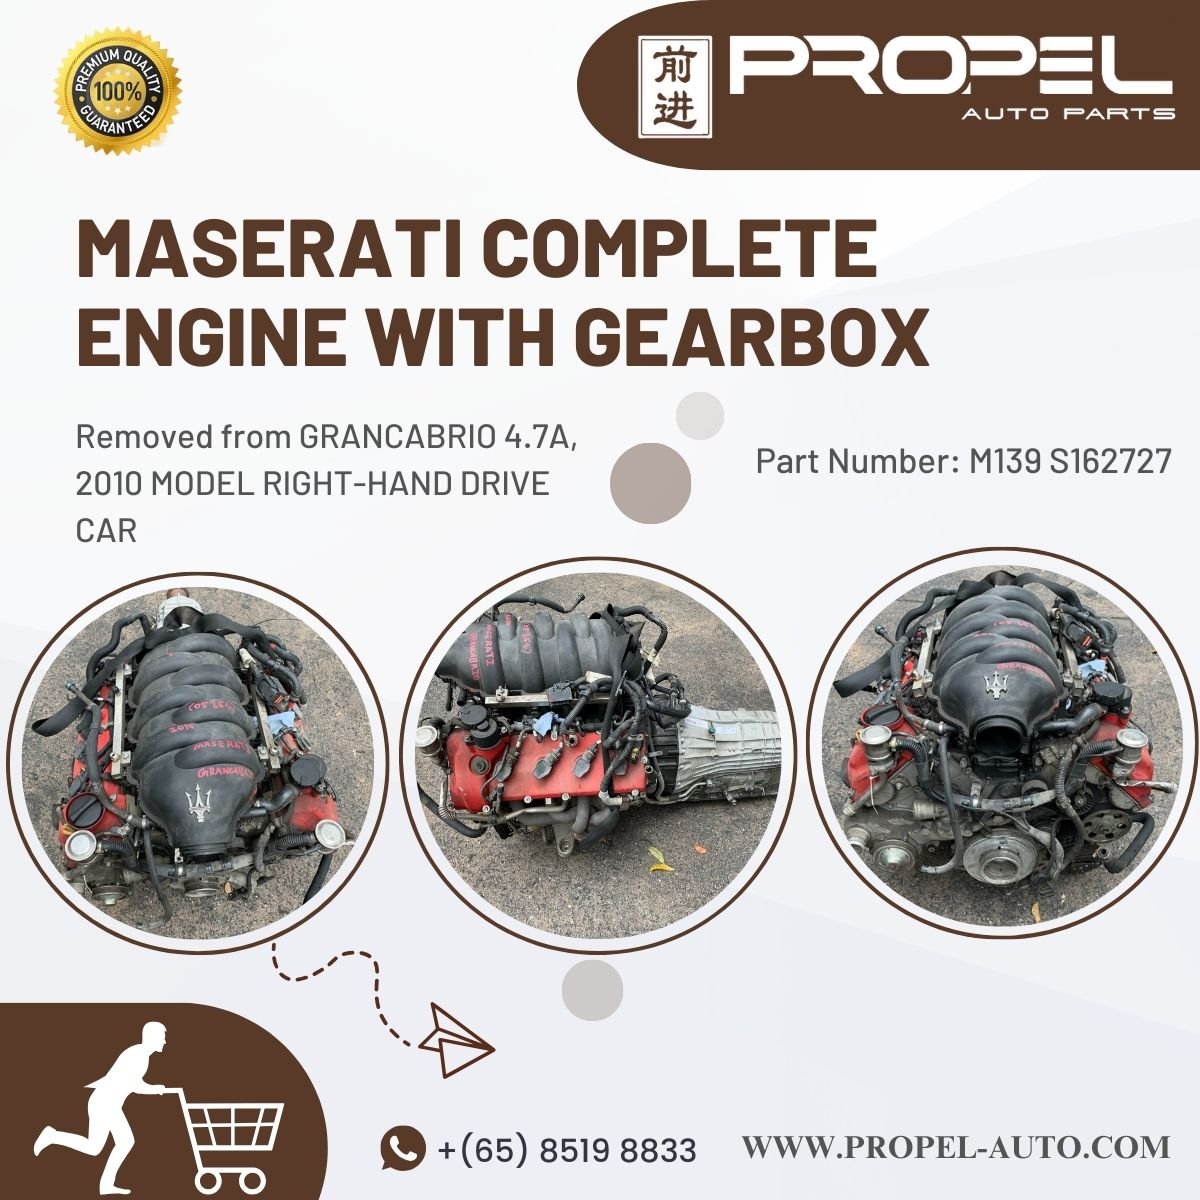 Maserati GranCabrio 4.7A M139 Engine & Gearbox available #ForSale Ping us & Shop now at #PropelAutoParts #SG #Maserati #GranCabrio #M139 #Engine #Gearbox #ExoticCar #Supercars #EngineParts #Transmission #MaseratiParts #Genuine #Carparts #OnlineStore #Autoparts #Ping #ShopNow